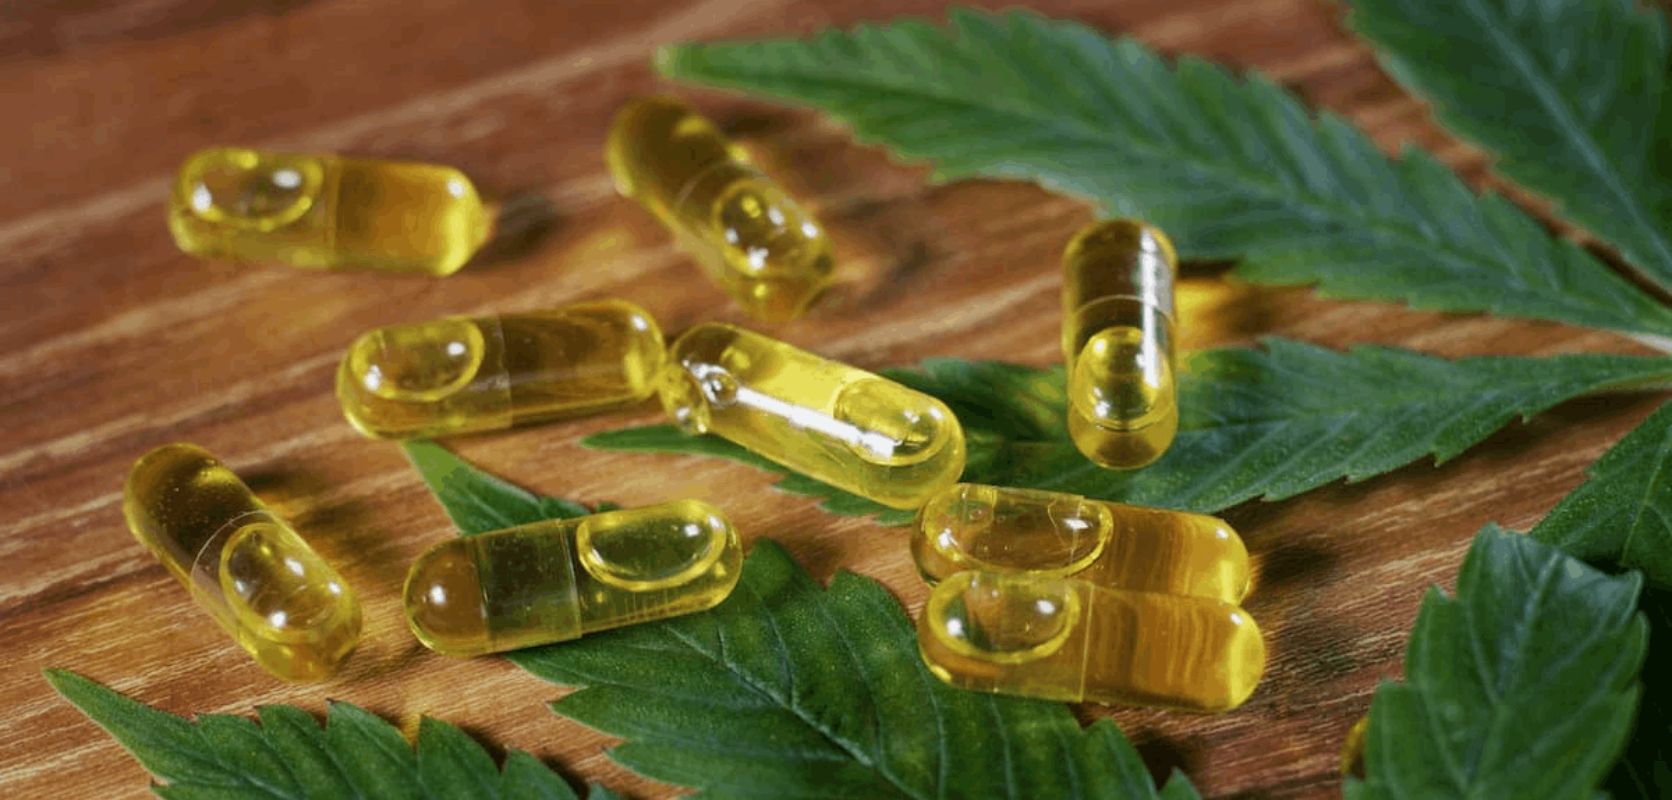 In short, THC pills or weed capsules are oral medications that contain the psychoactive component of the cannabis plant, delta-9-tetrahydrocannabinol